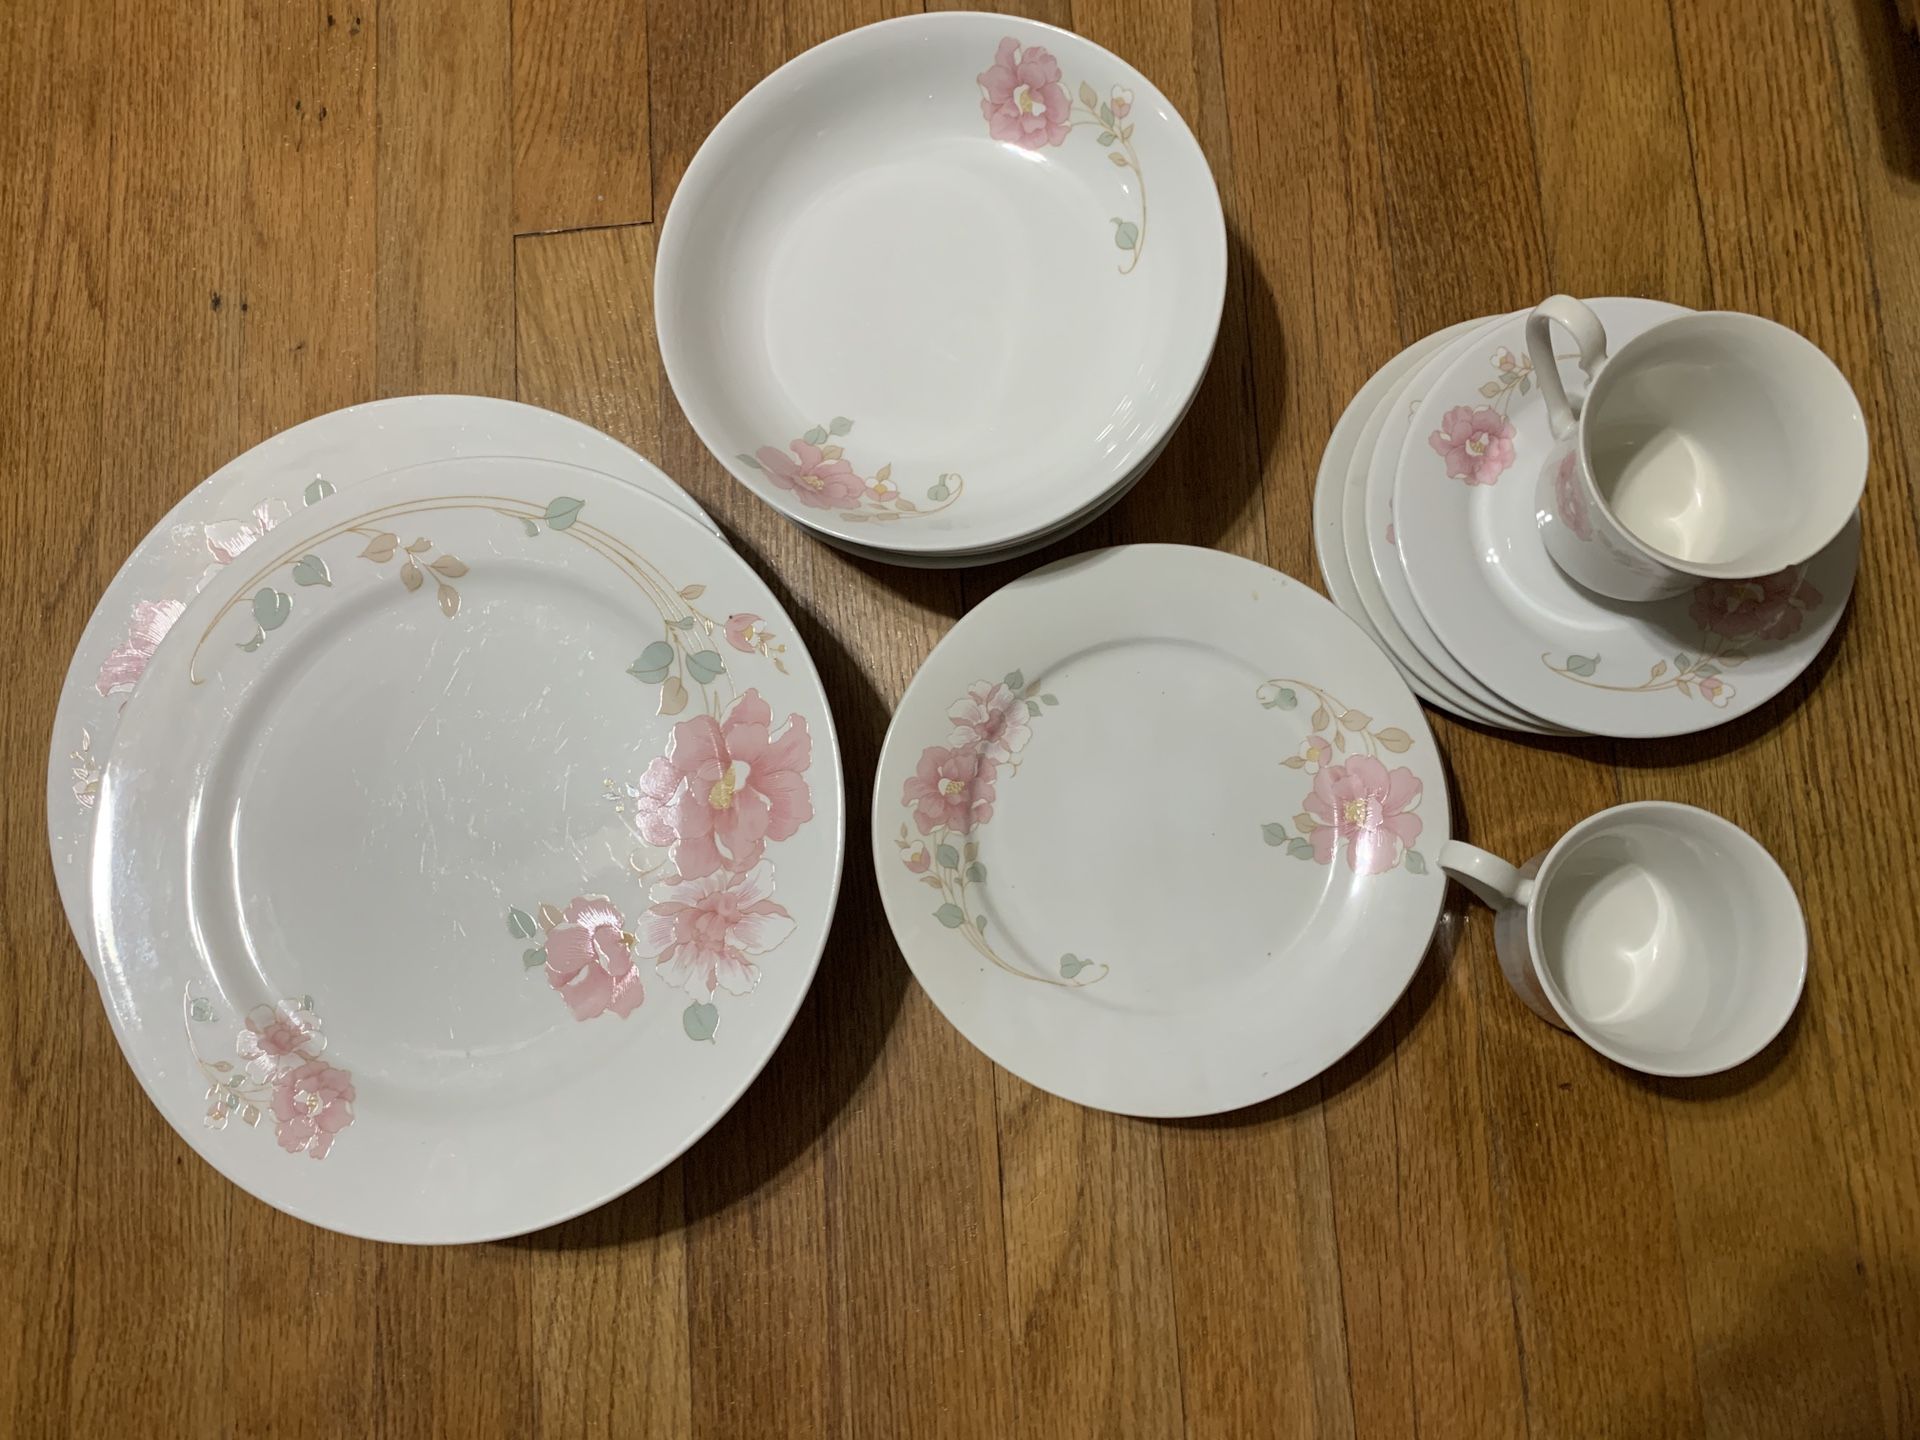 Set of 4 porcelain wares and 2 tea cups